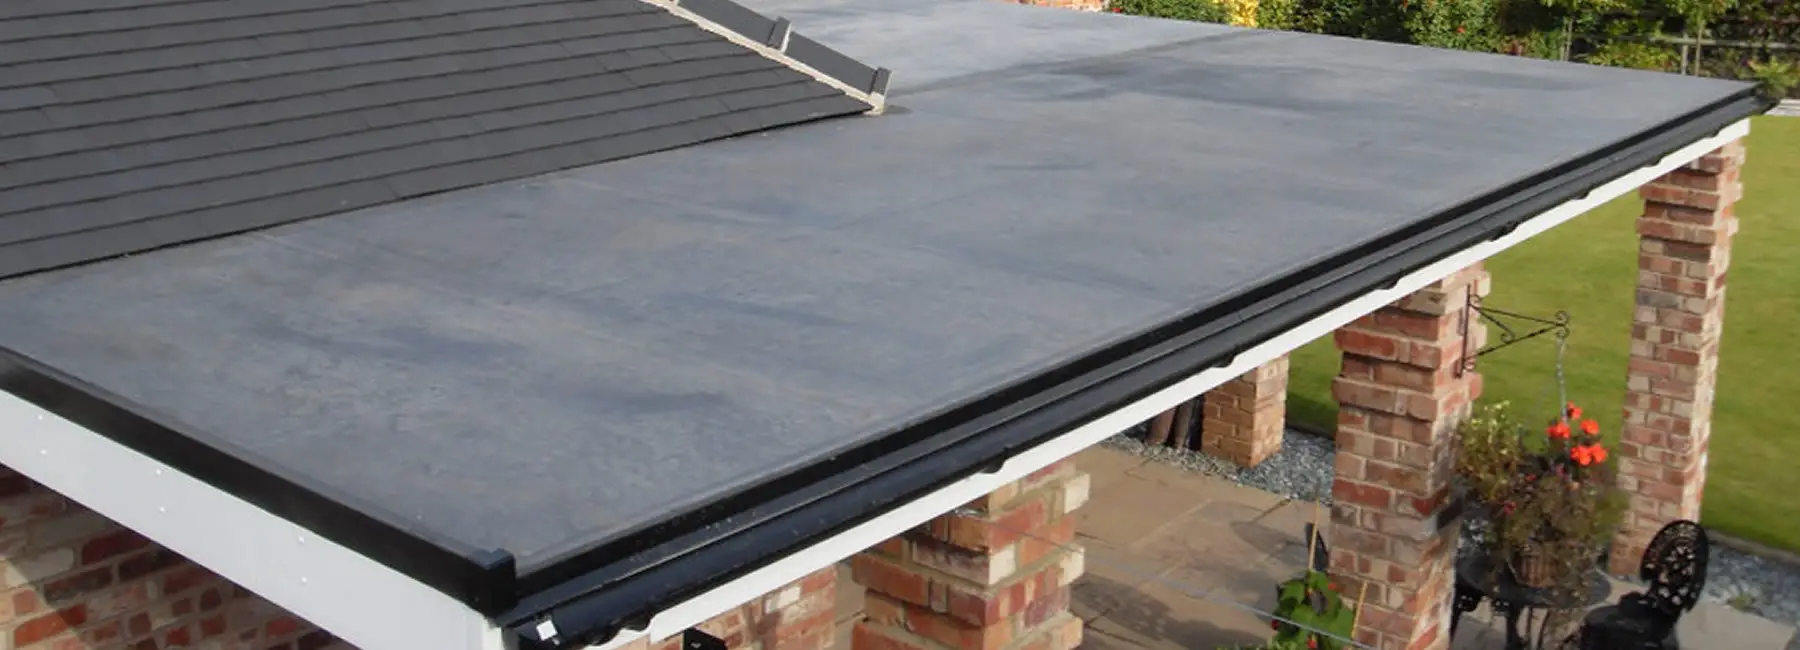 RIPLEY RUBBER ROOFING